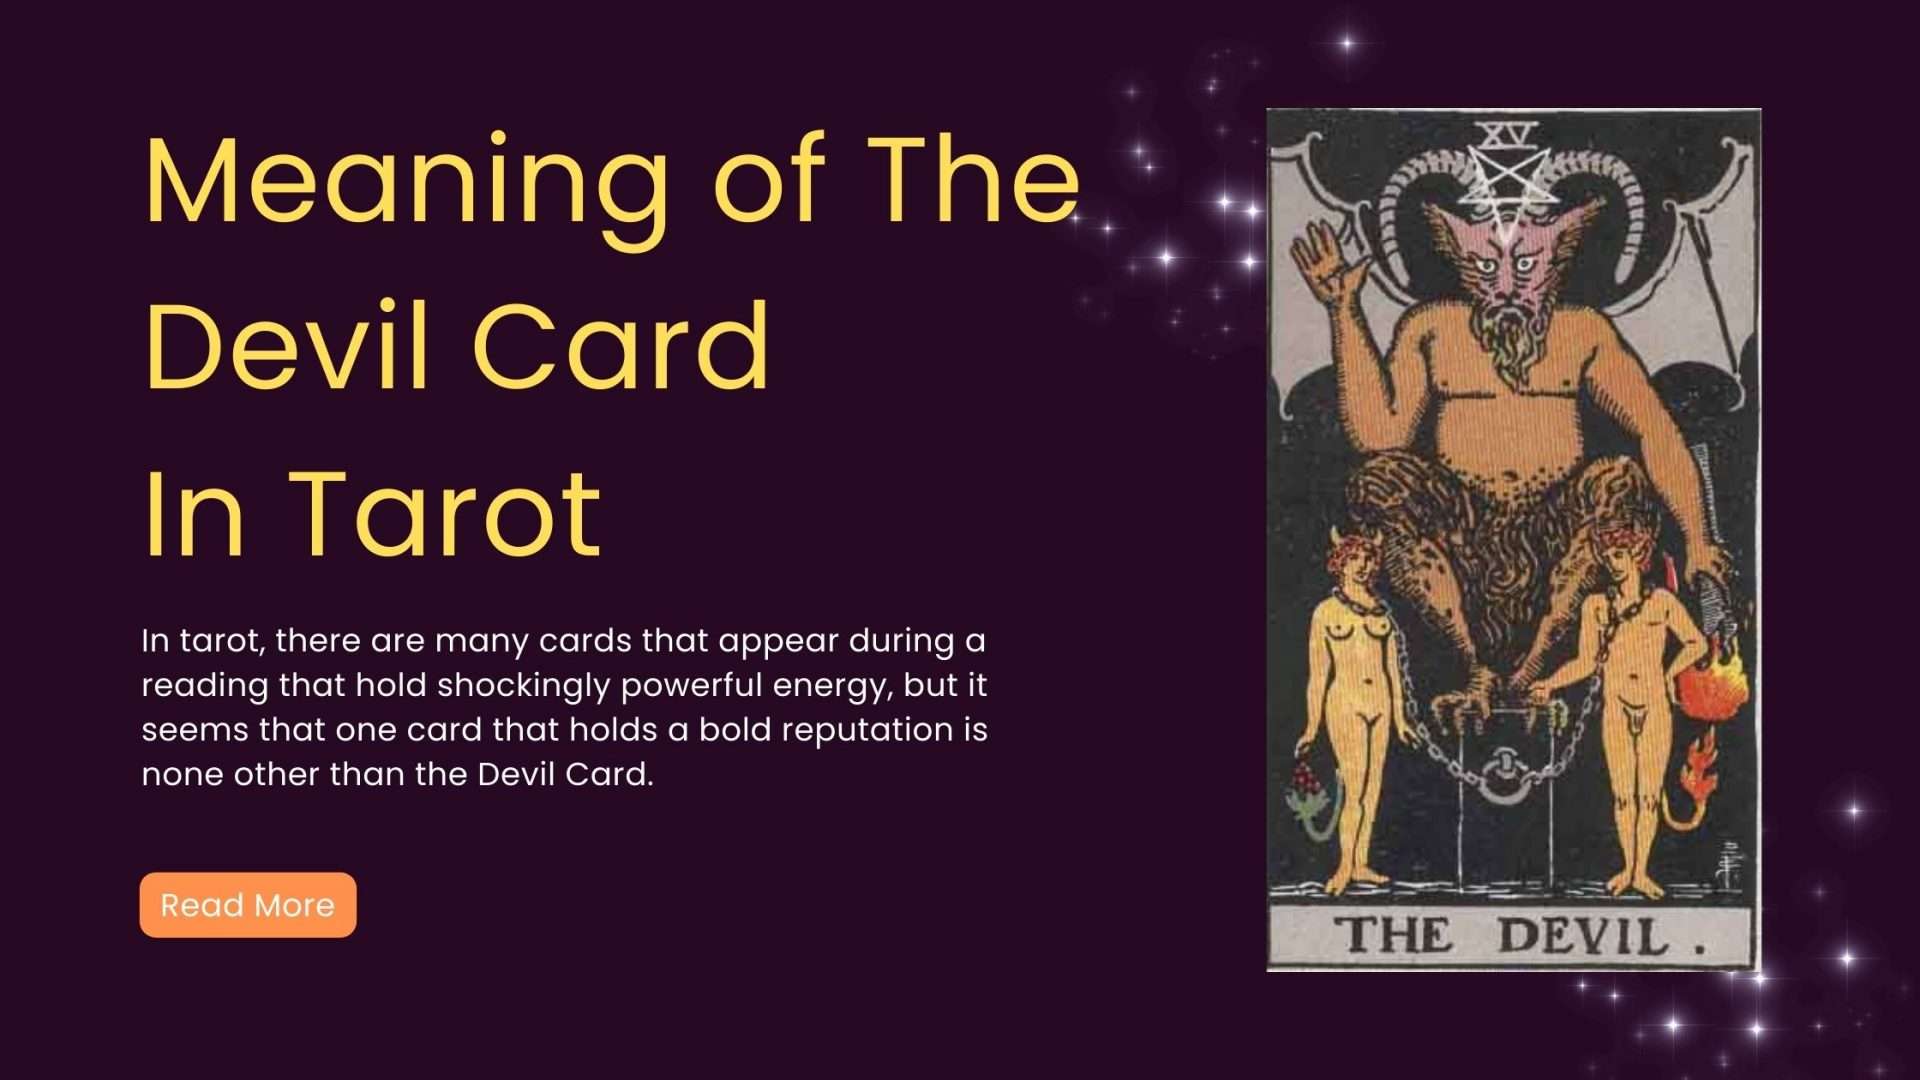 Meaning of Devil card in Tarot